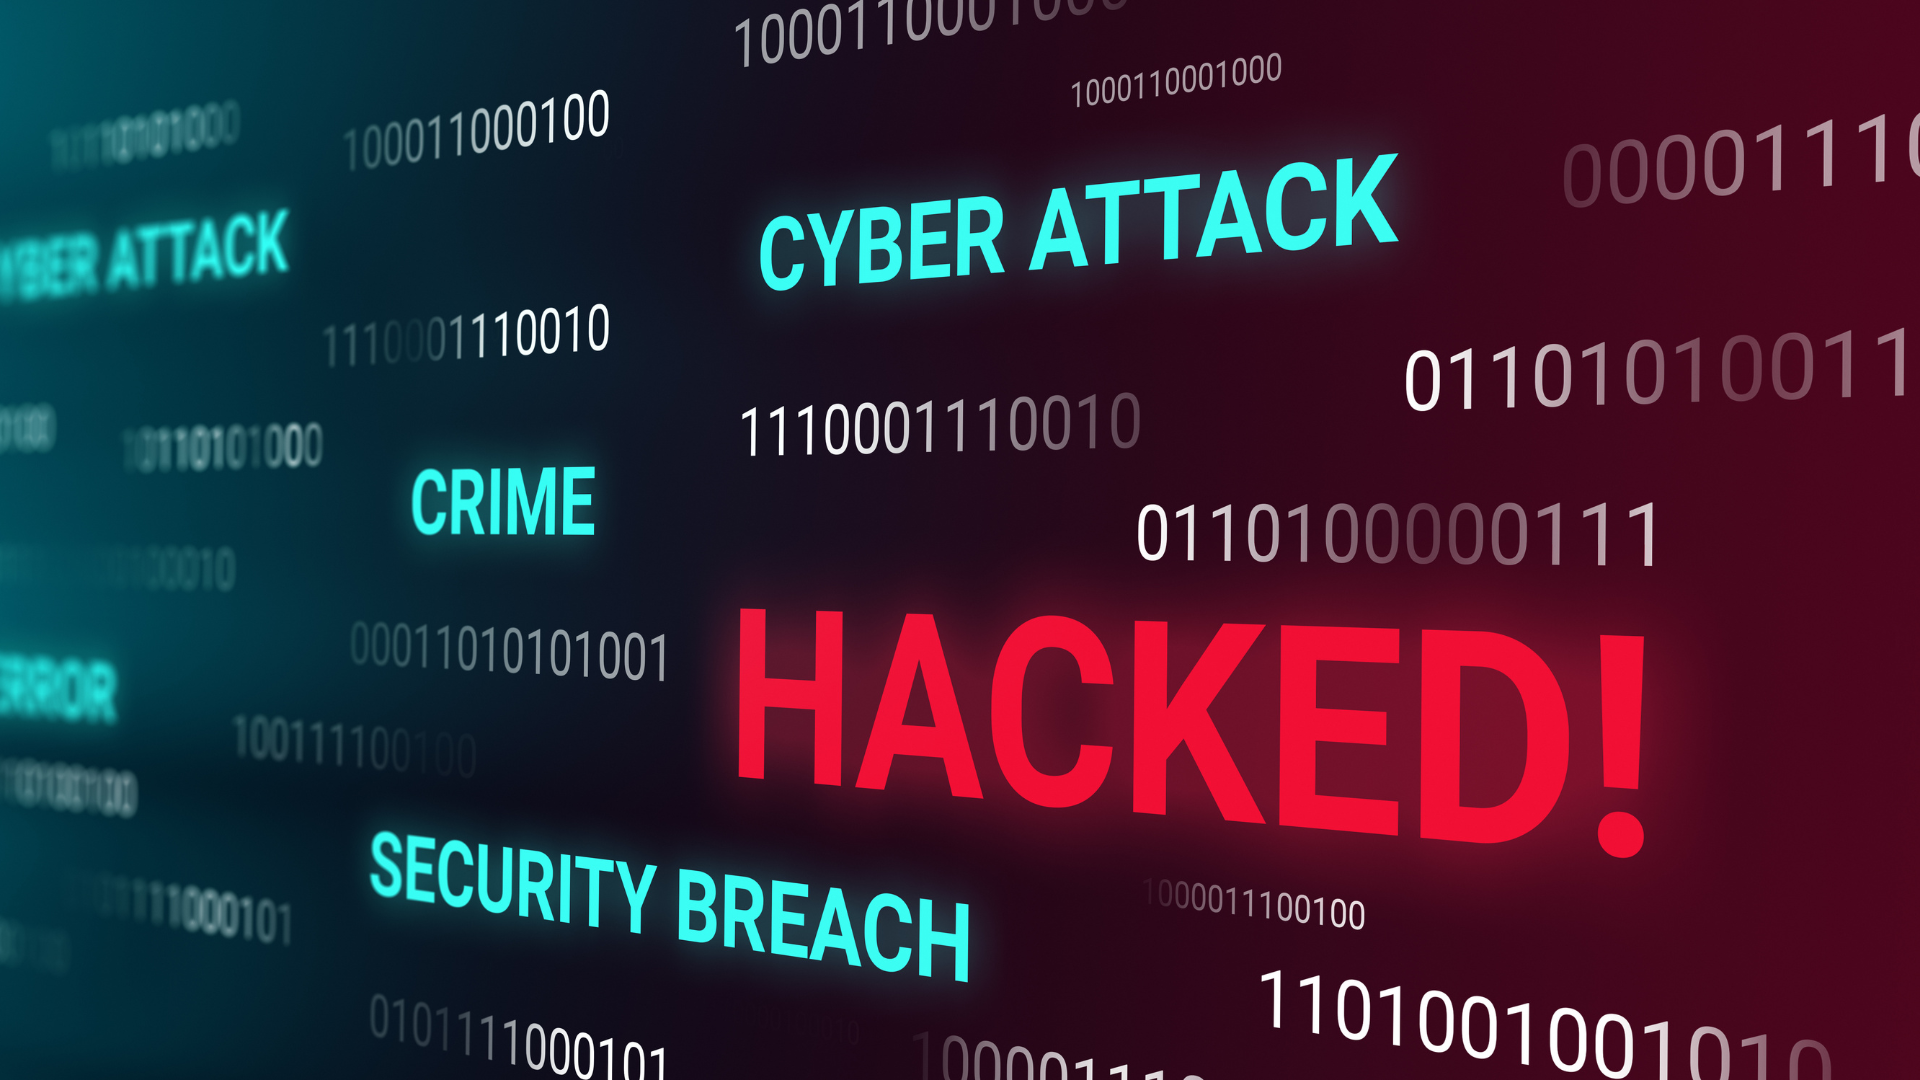 CIPC hack has potentially serious consequences for SA organisations